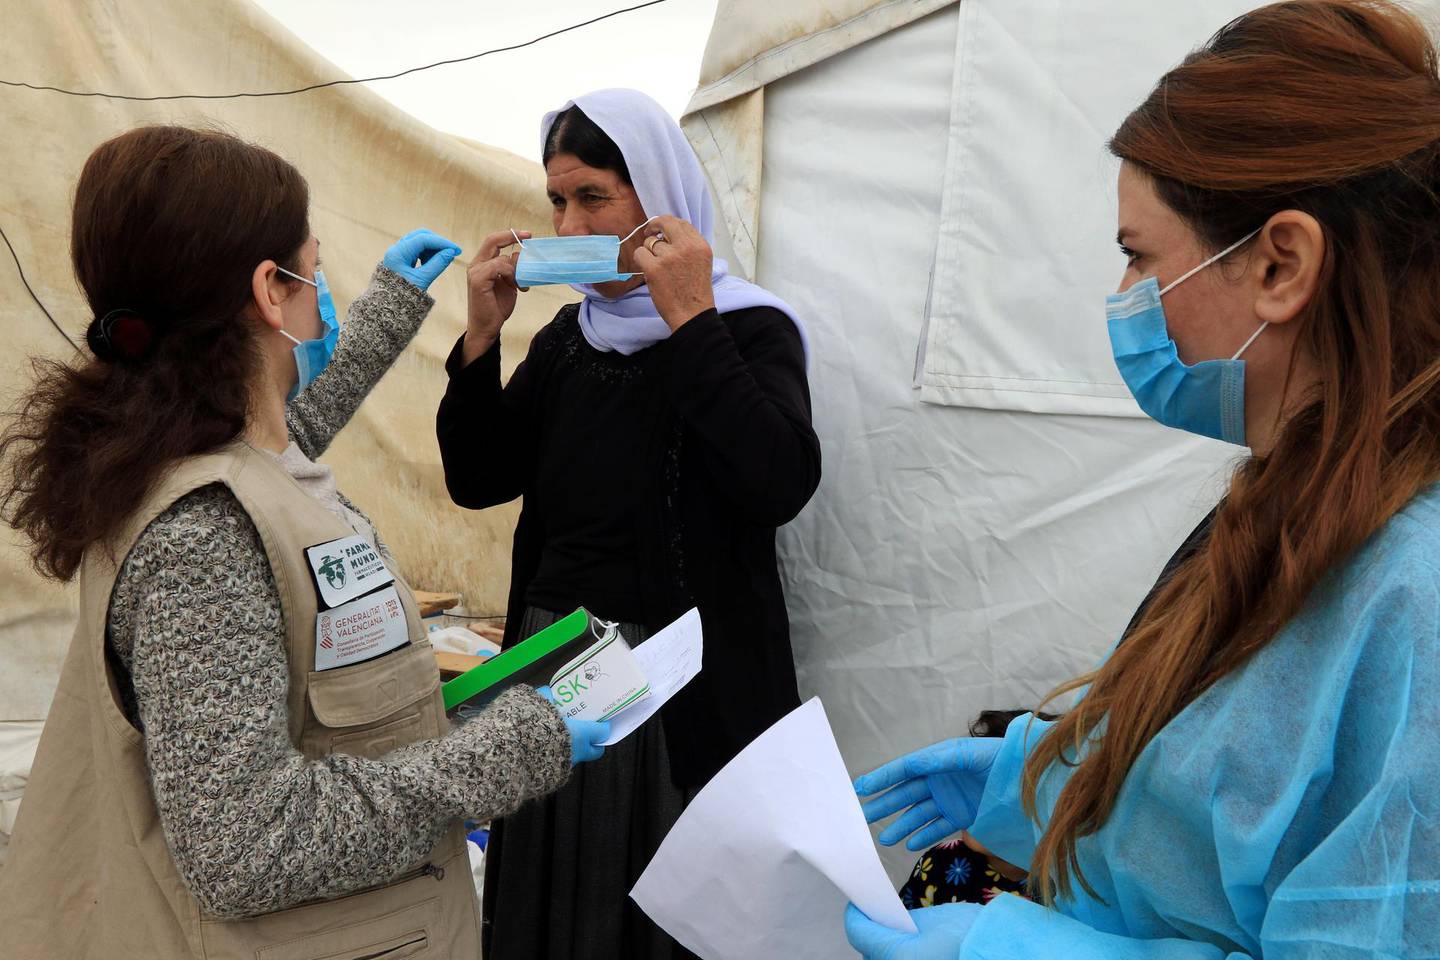 A member of medical staff, assists a Yazidi displaced woman to wear a protective face mask, following the coronavirus outbreak, at the Sharya camp in Duhok, Iraq March 7, 2020. REUTERS/Ari Jalal